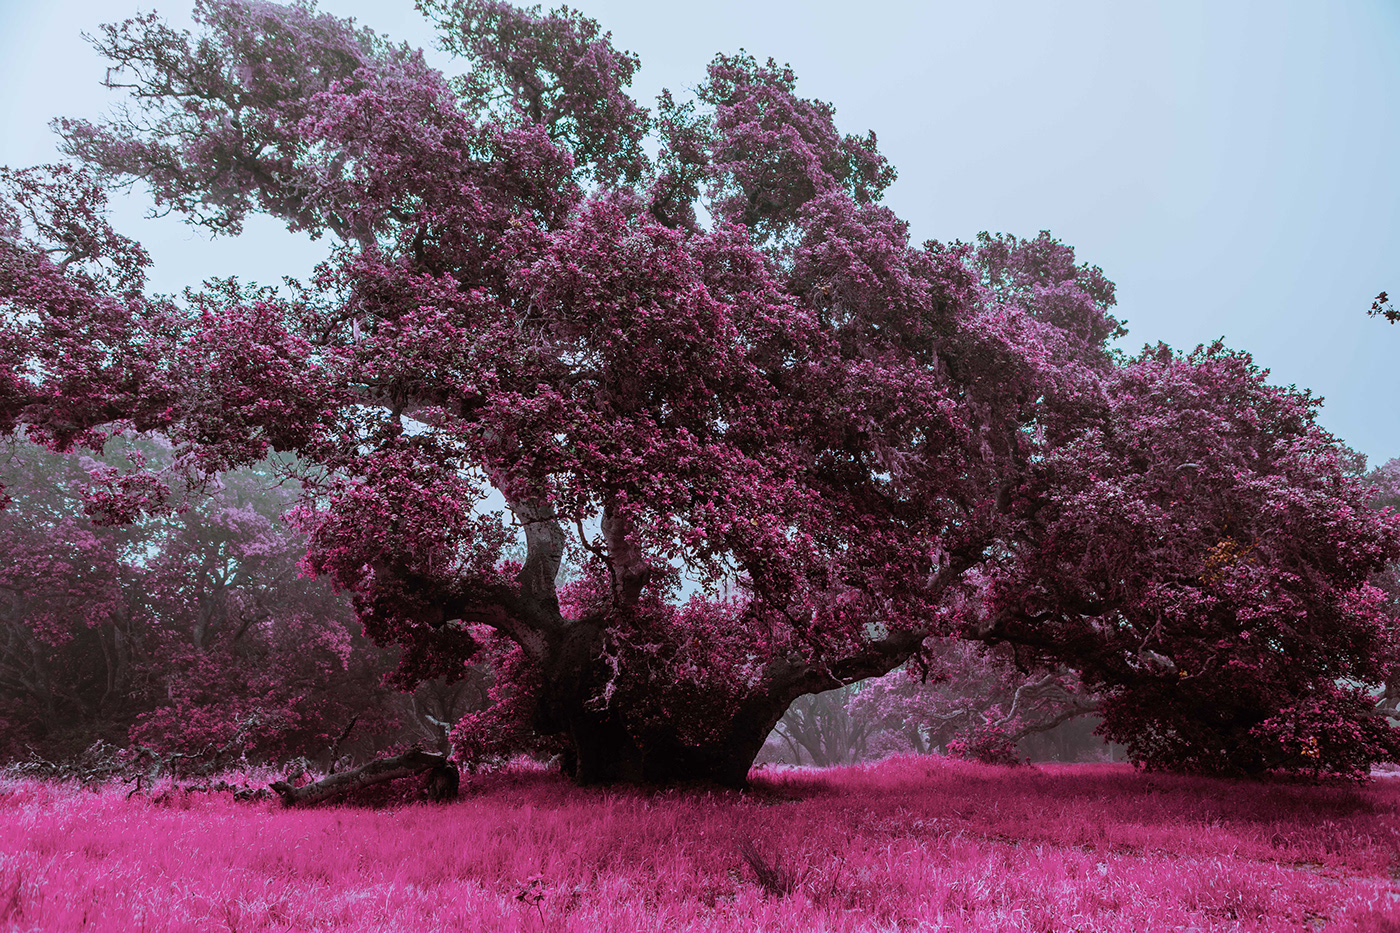 Aerochrome California fog foggy forest forest infrared infrared photography landscape photography neon trees